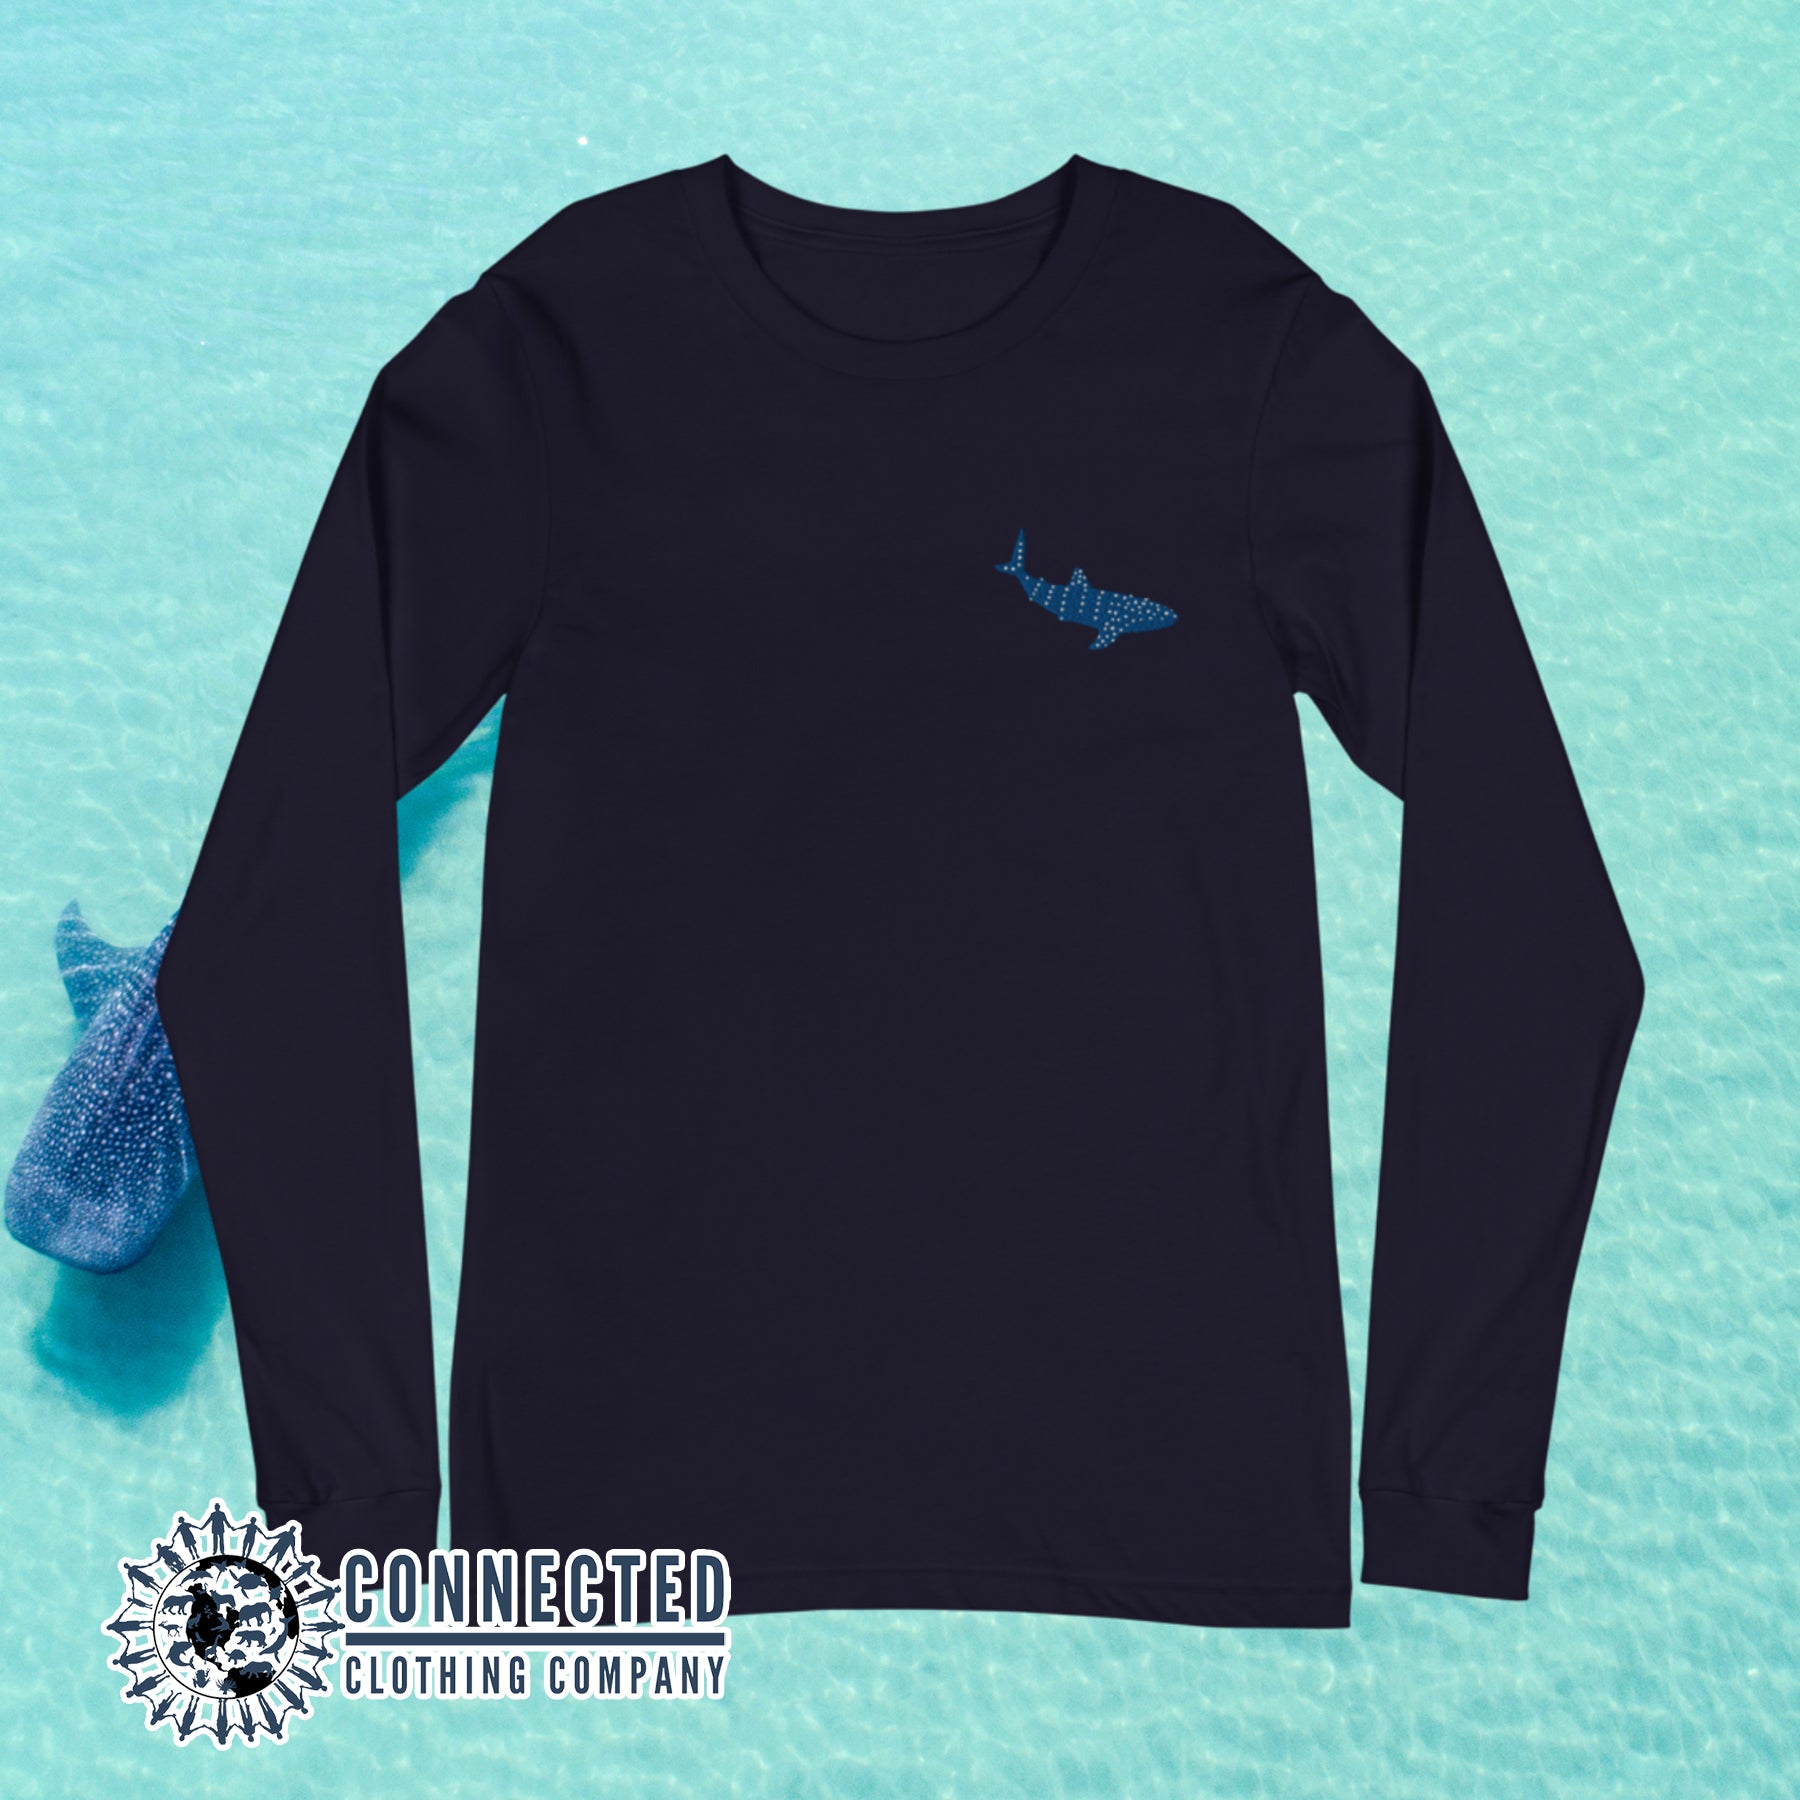 Navy Blue Embroidered Whale Shark Long-Sleeve Shirt - sweetsherriloudesigns - Ethically and Sustainably Made - 10% of profits donated to shark conservation and ocean conservation